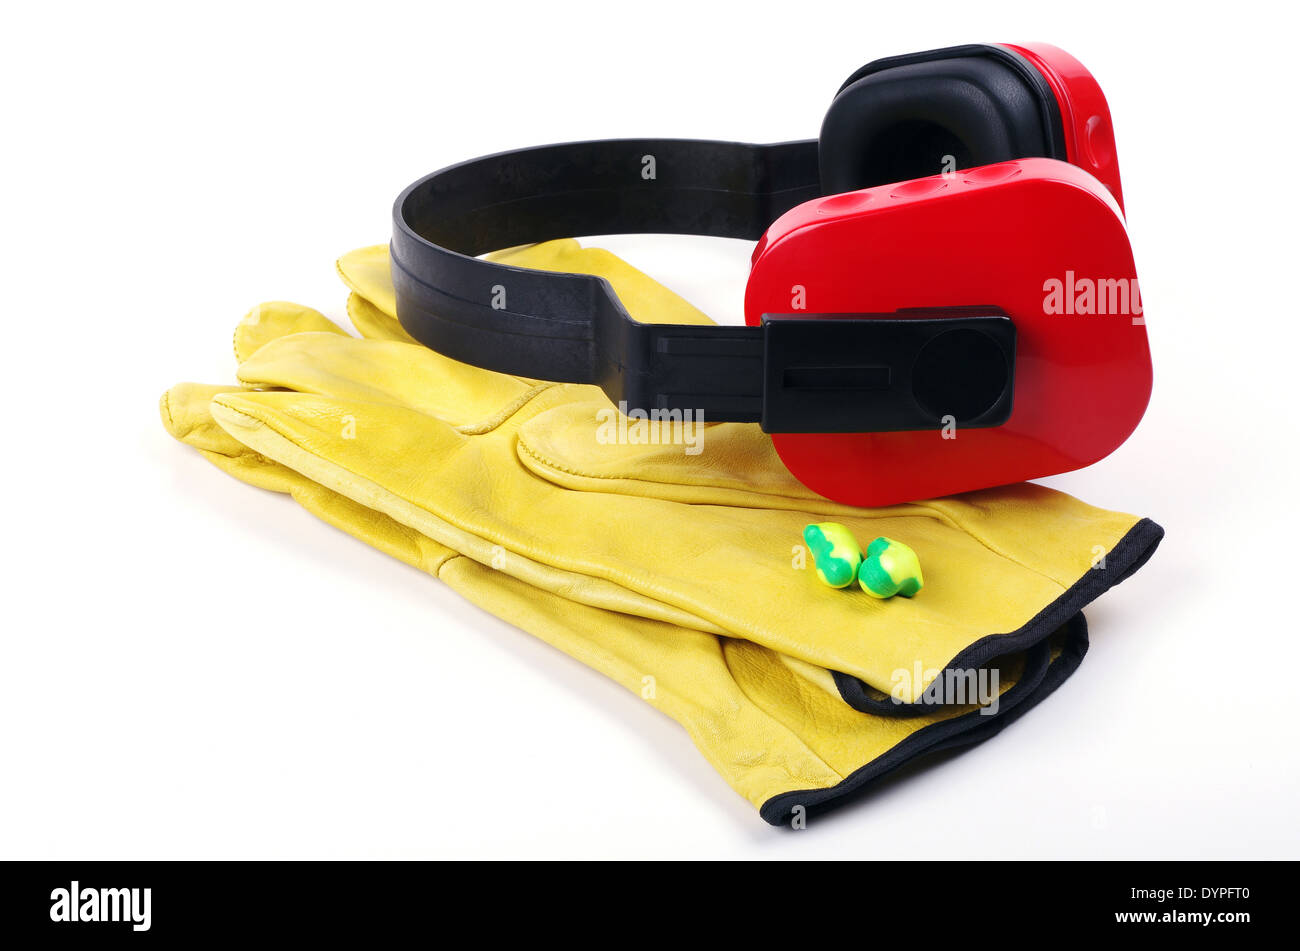 work gloves and ear plugs Stock Photo